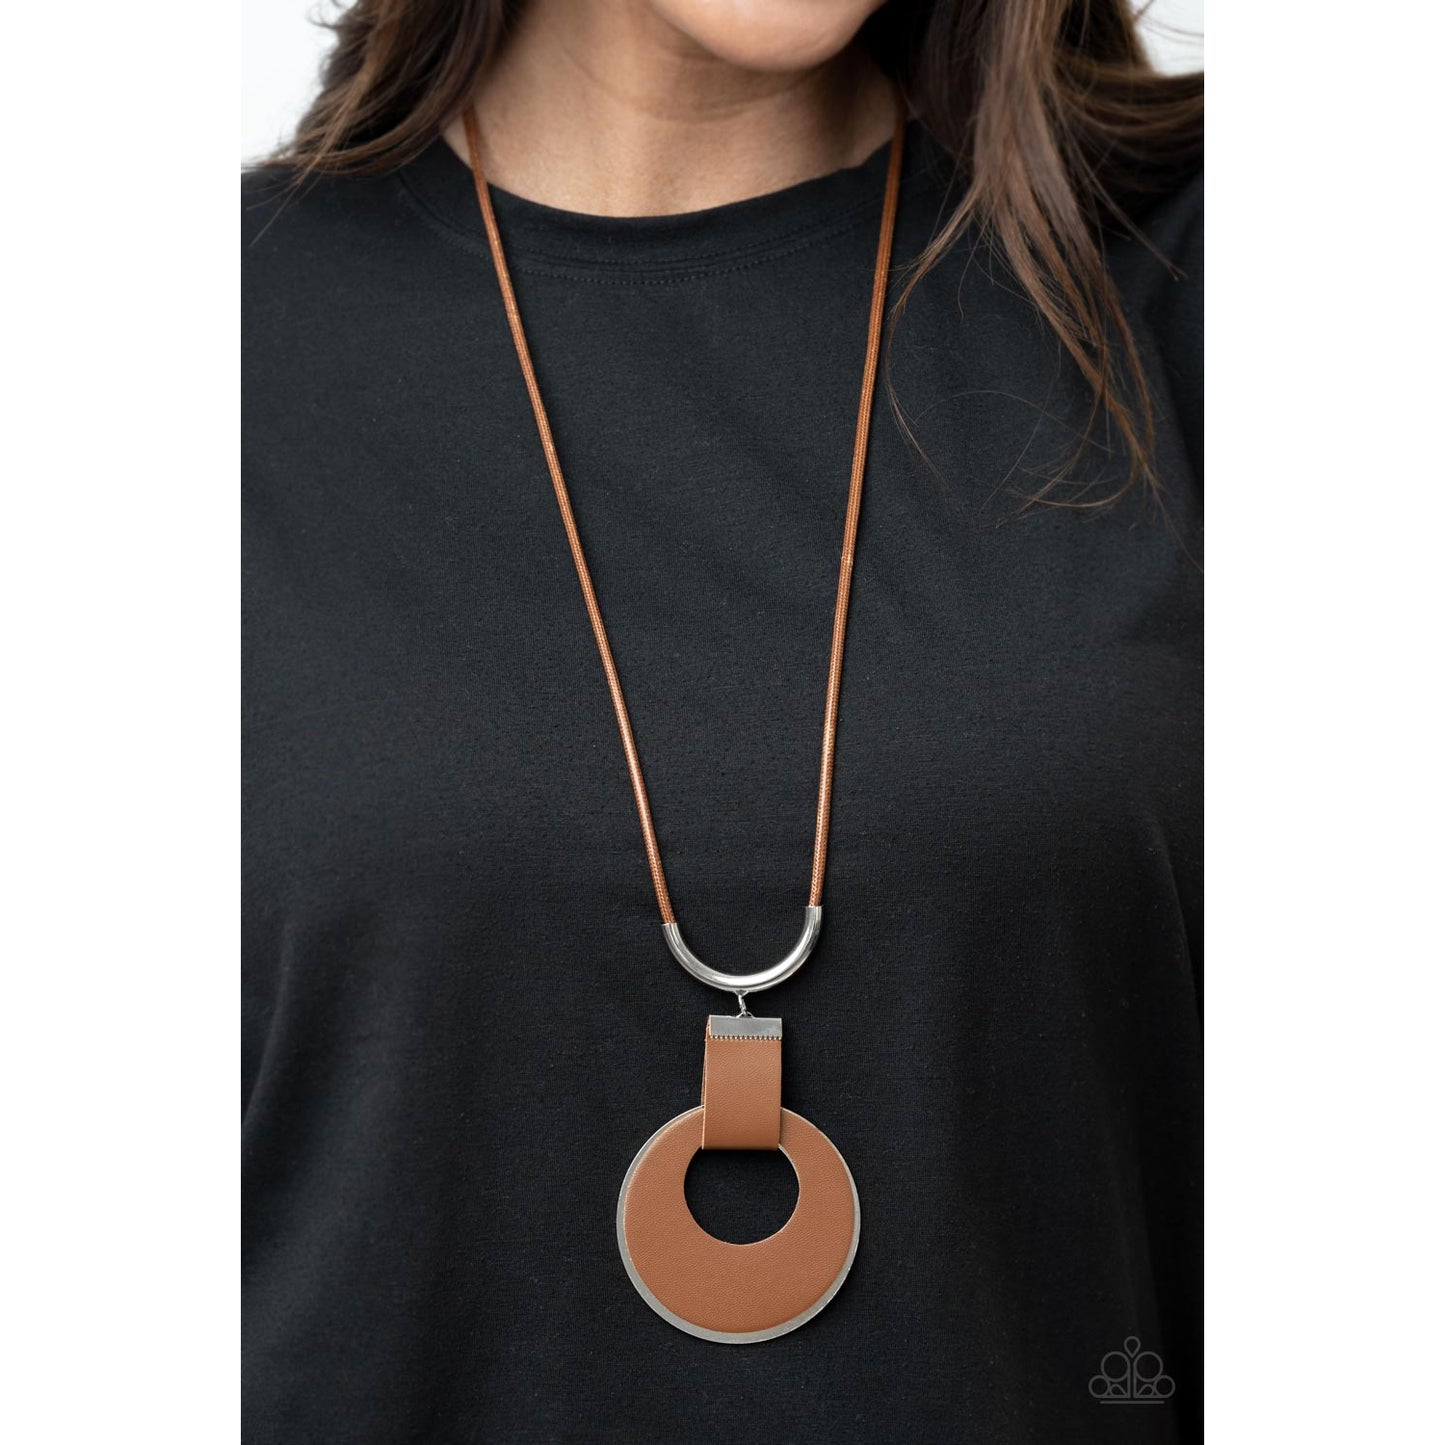 Luxe Crush - Brown Leather Necklace - Paparazzi Accessories - GlaMarous Titi Jewels